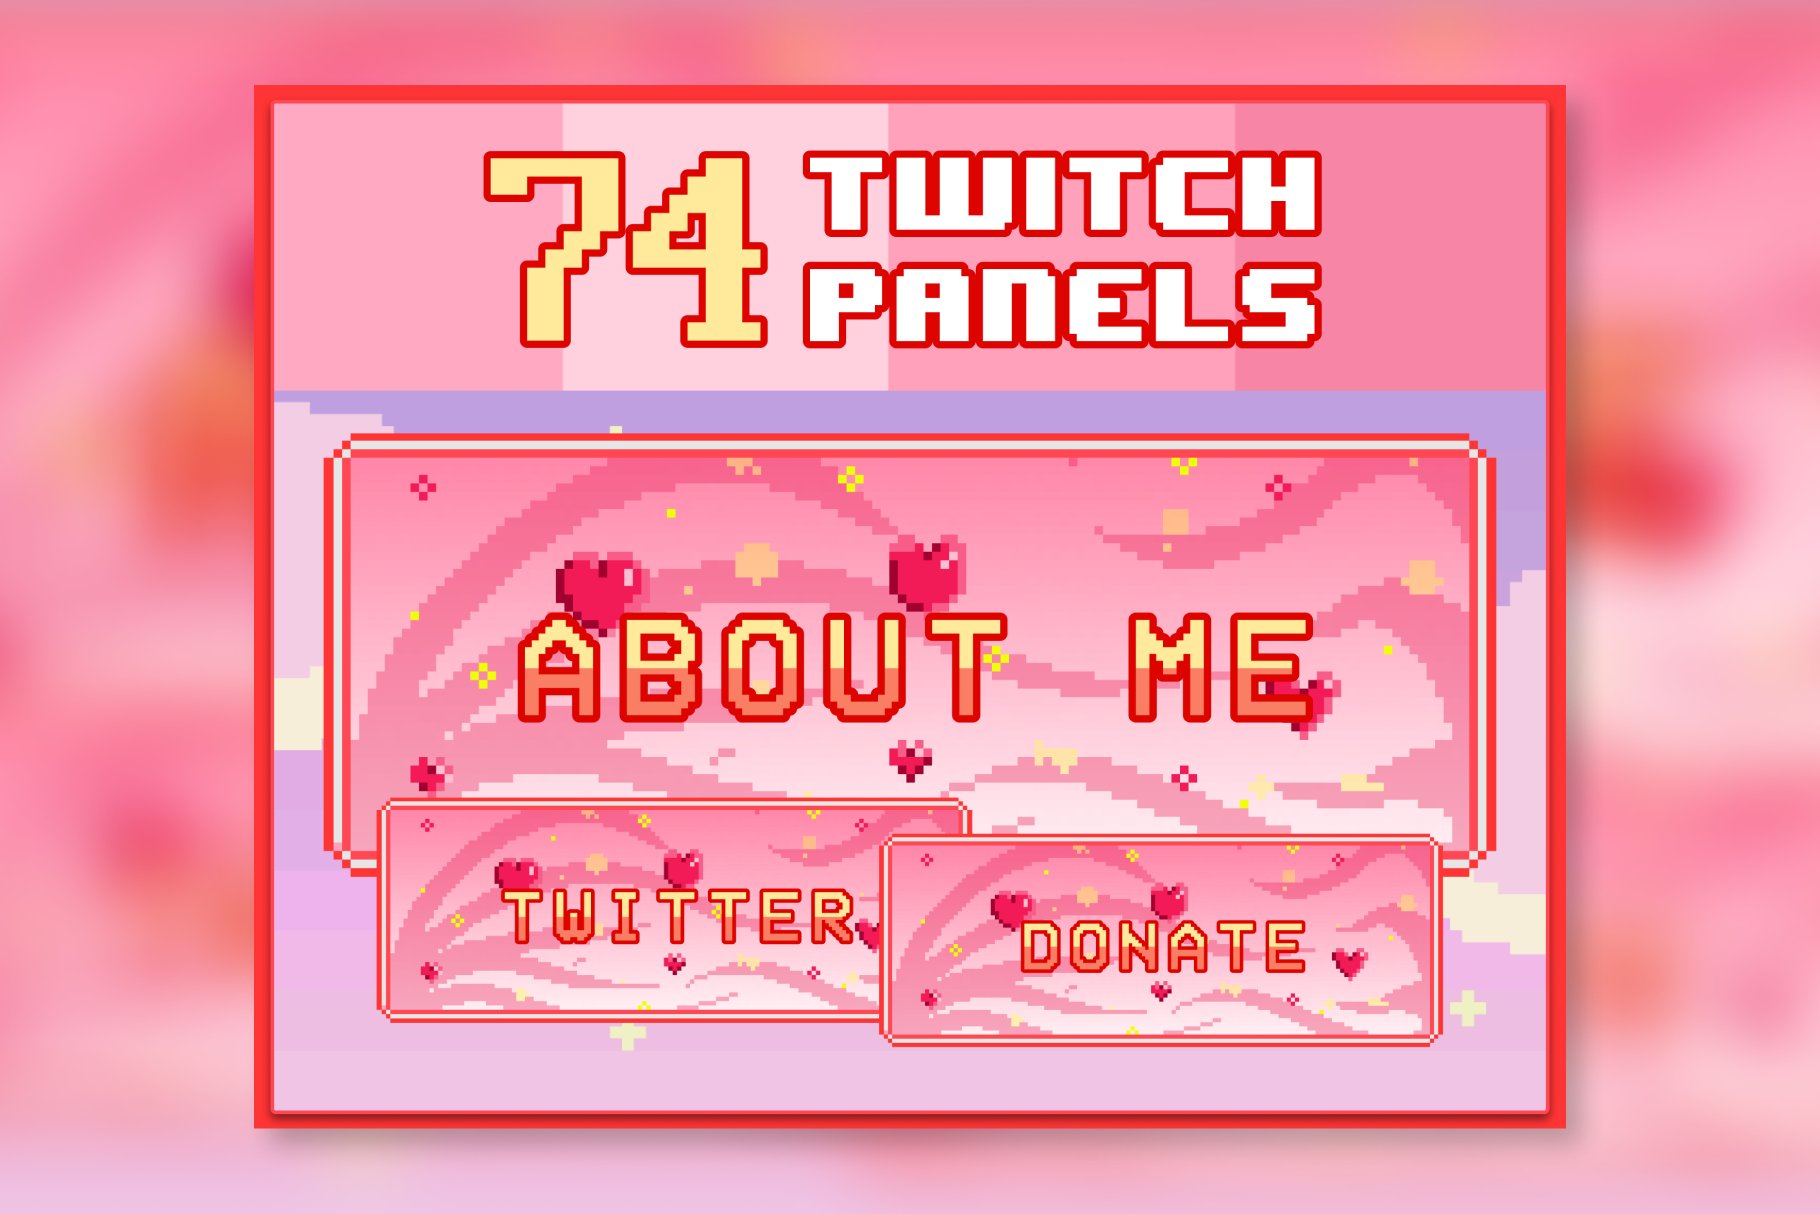 74x Hearts Pixel Panels for Twitch cover image.